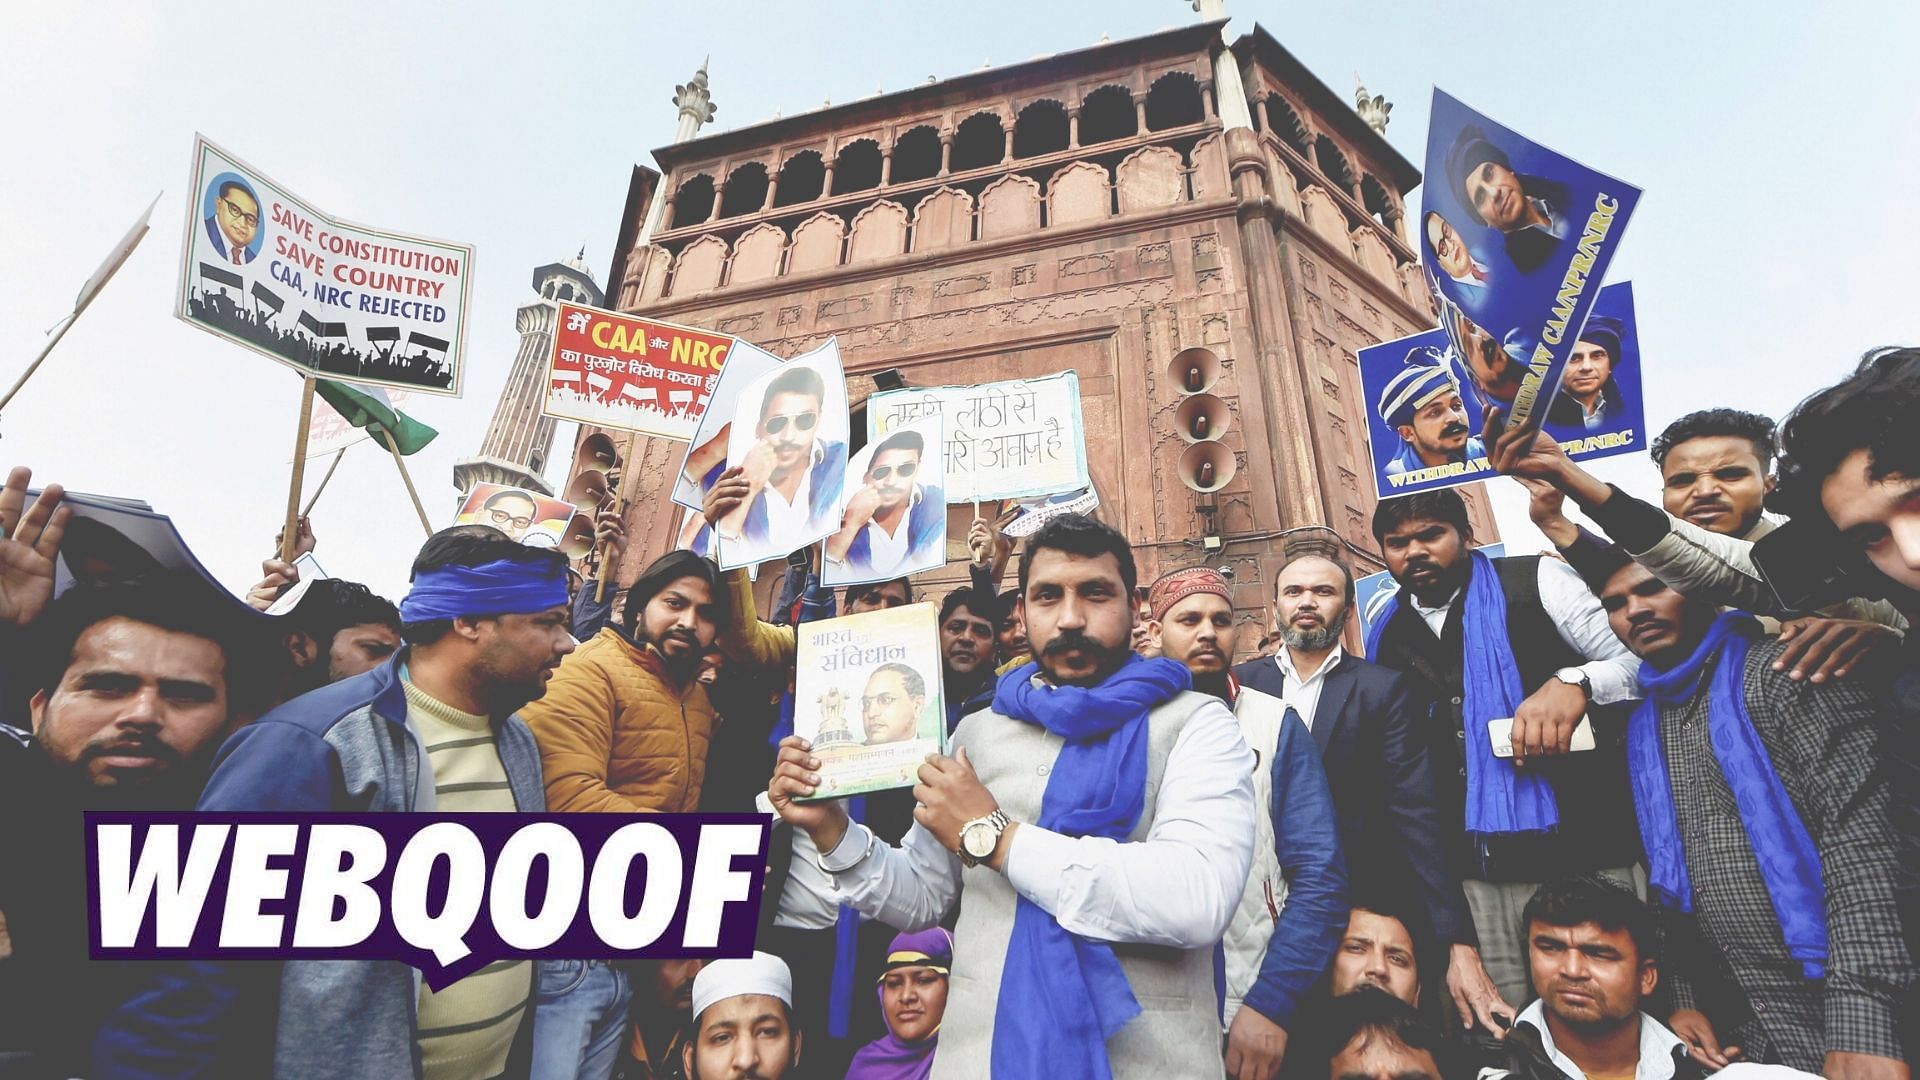 Bhim Army Chief Chandrasekhar Azad holds a copy of the Indian Constitution during his visit to Jama Masjid, a day after his bail.